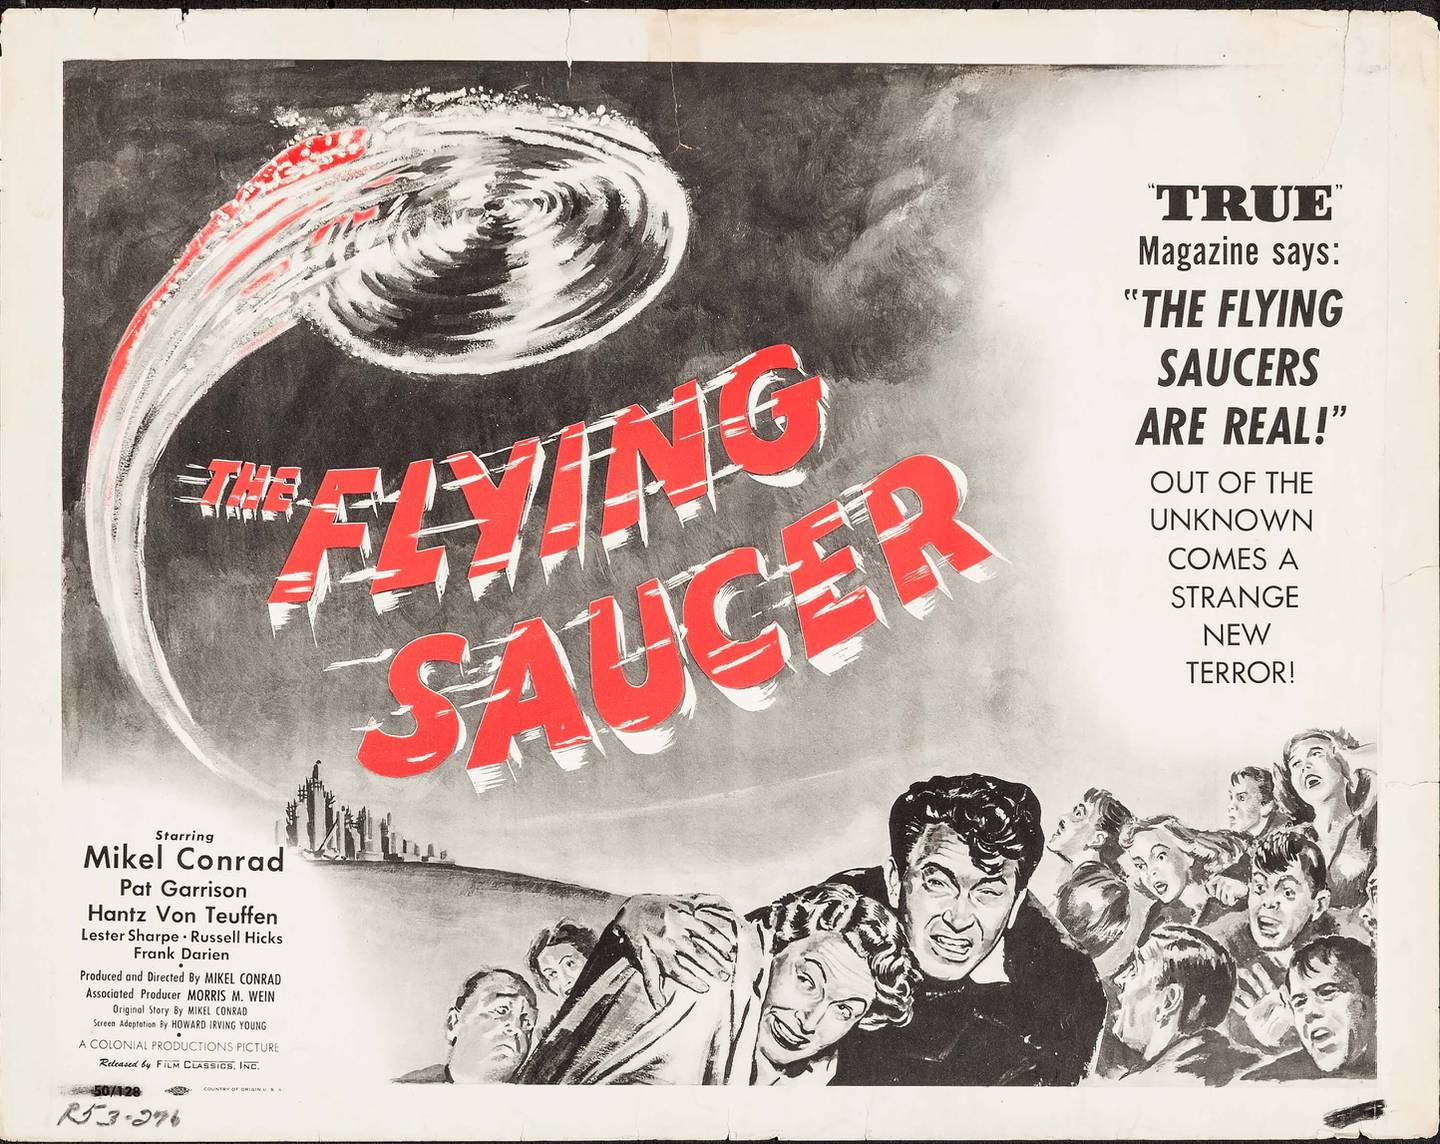 A movie poster for "The Flying Saucer"